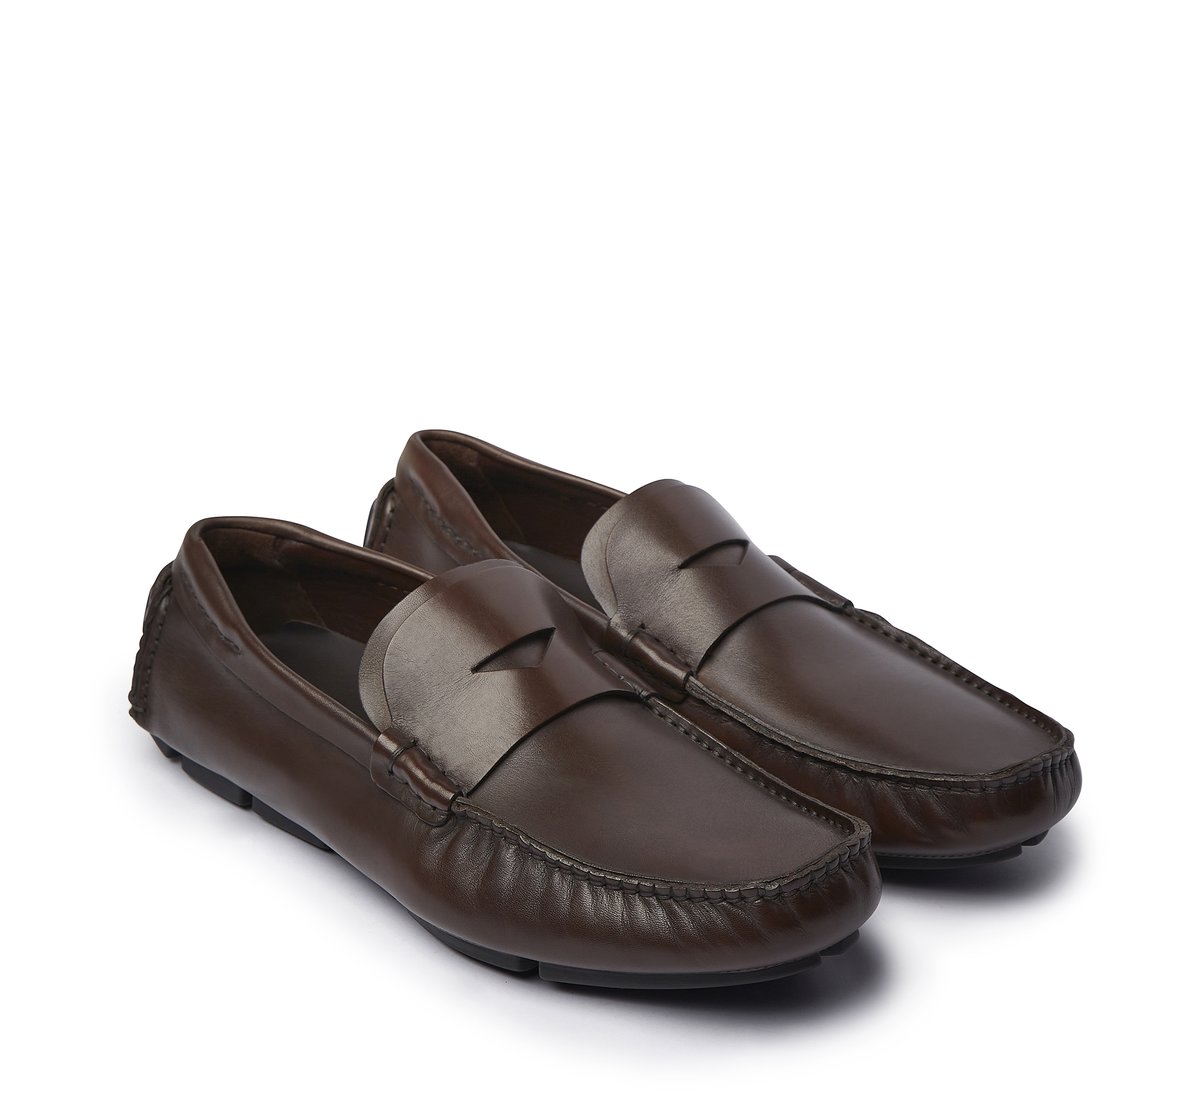 Calf leather loafer